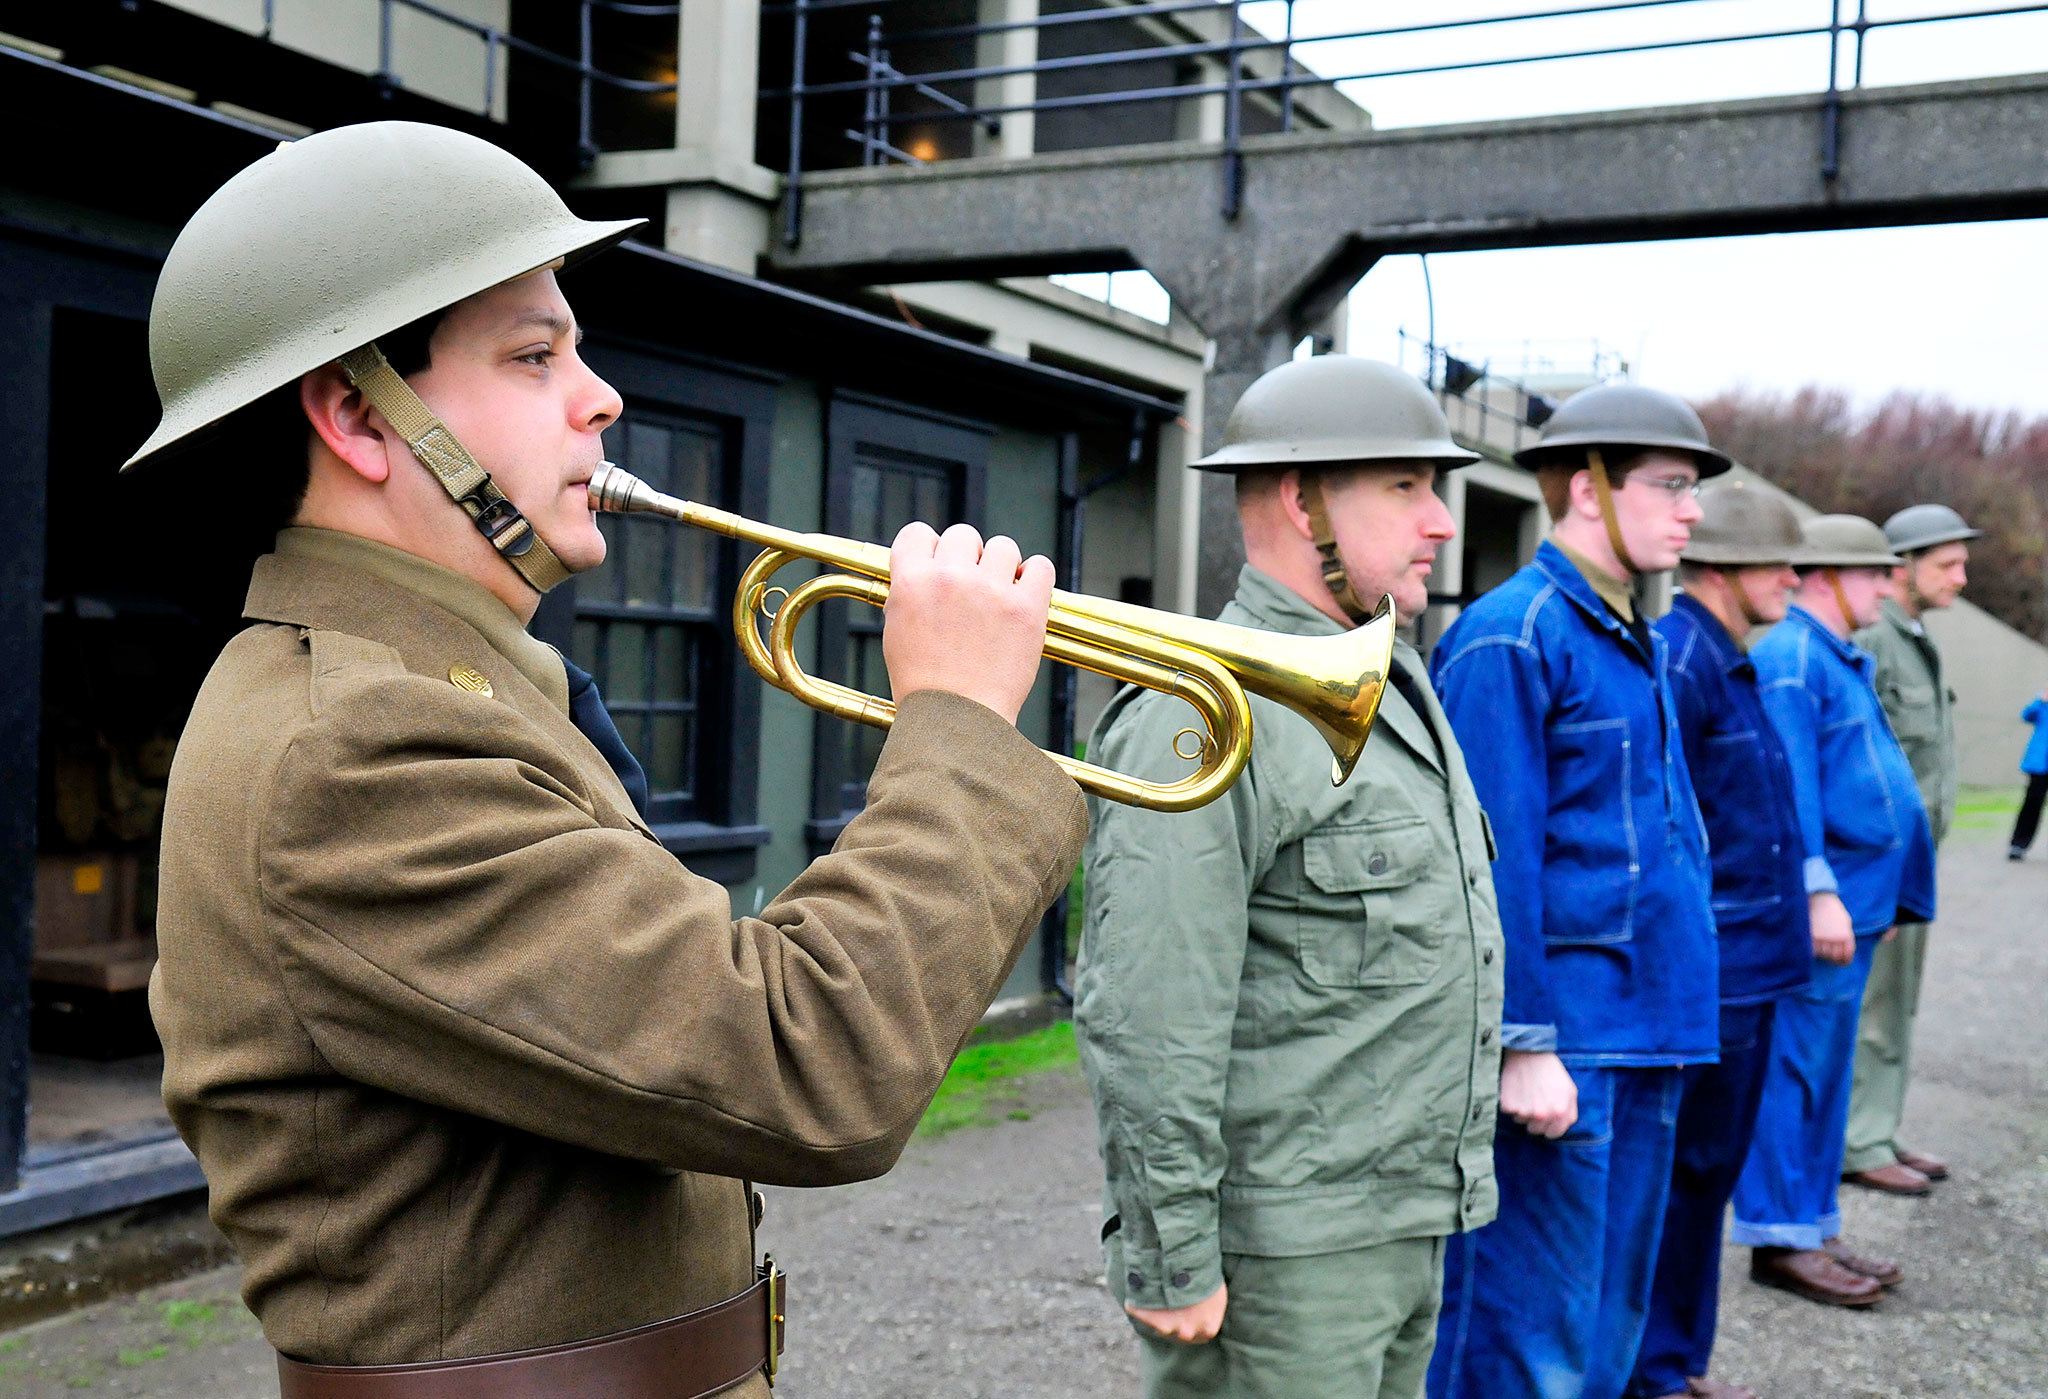 March back in time: Volunteers bring history to life at Fort Casey